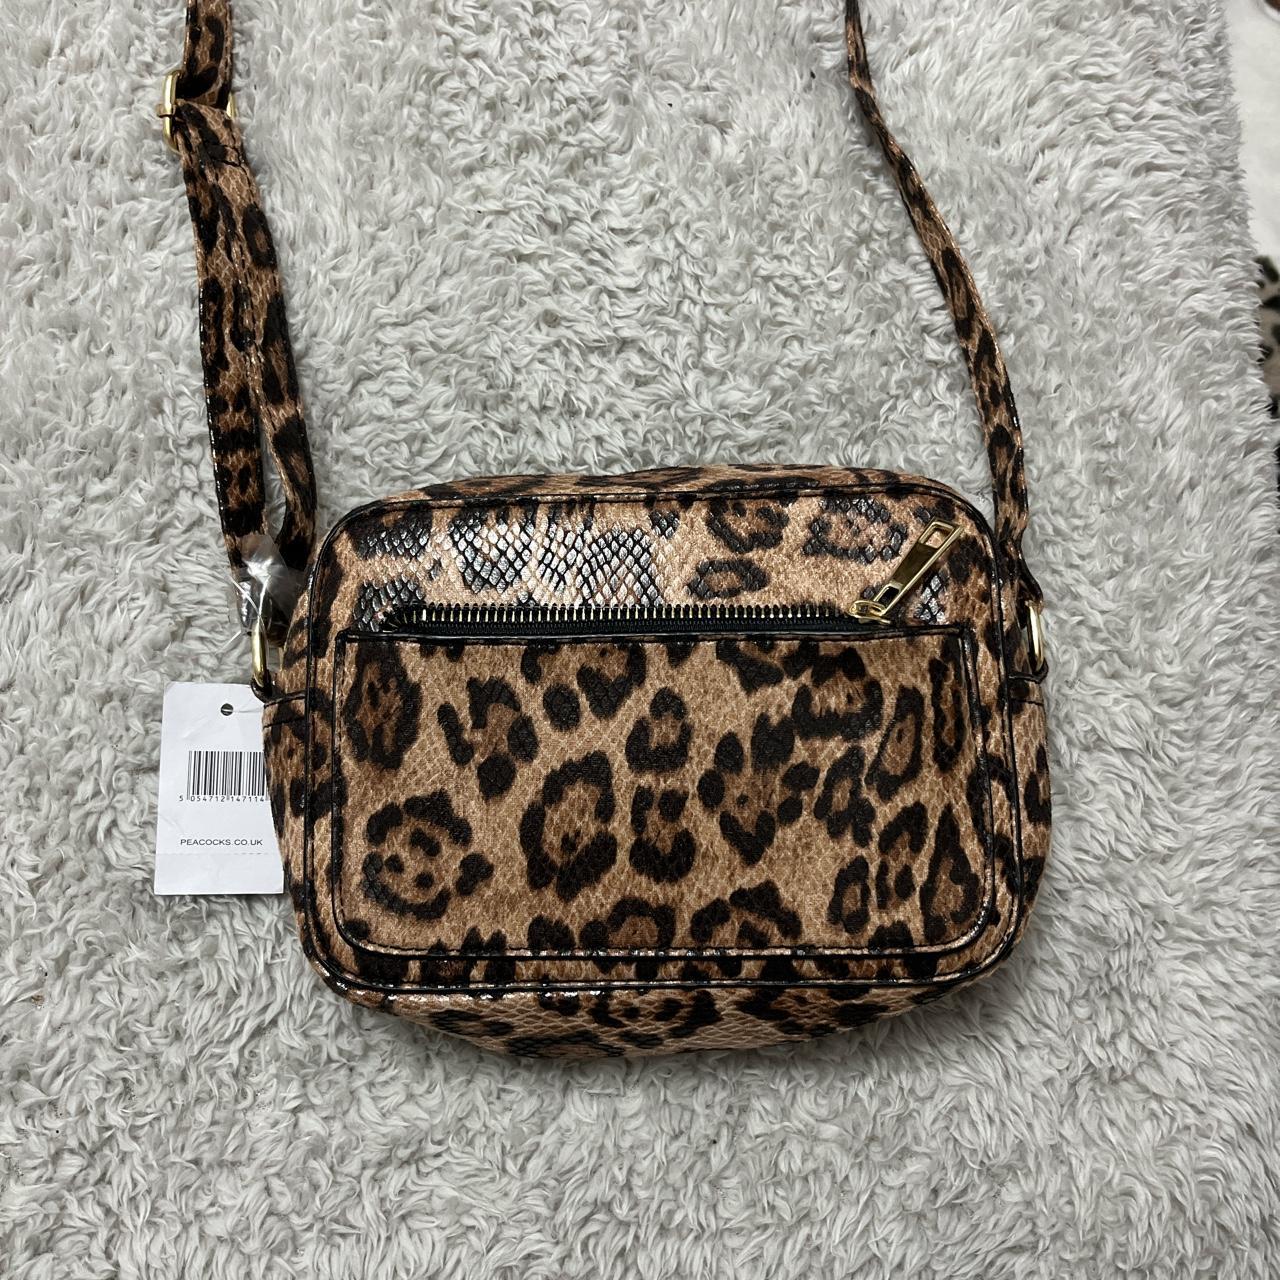 Leopard Print bag from peacocks brand new with tags!... - Depop